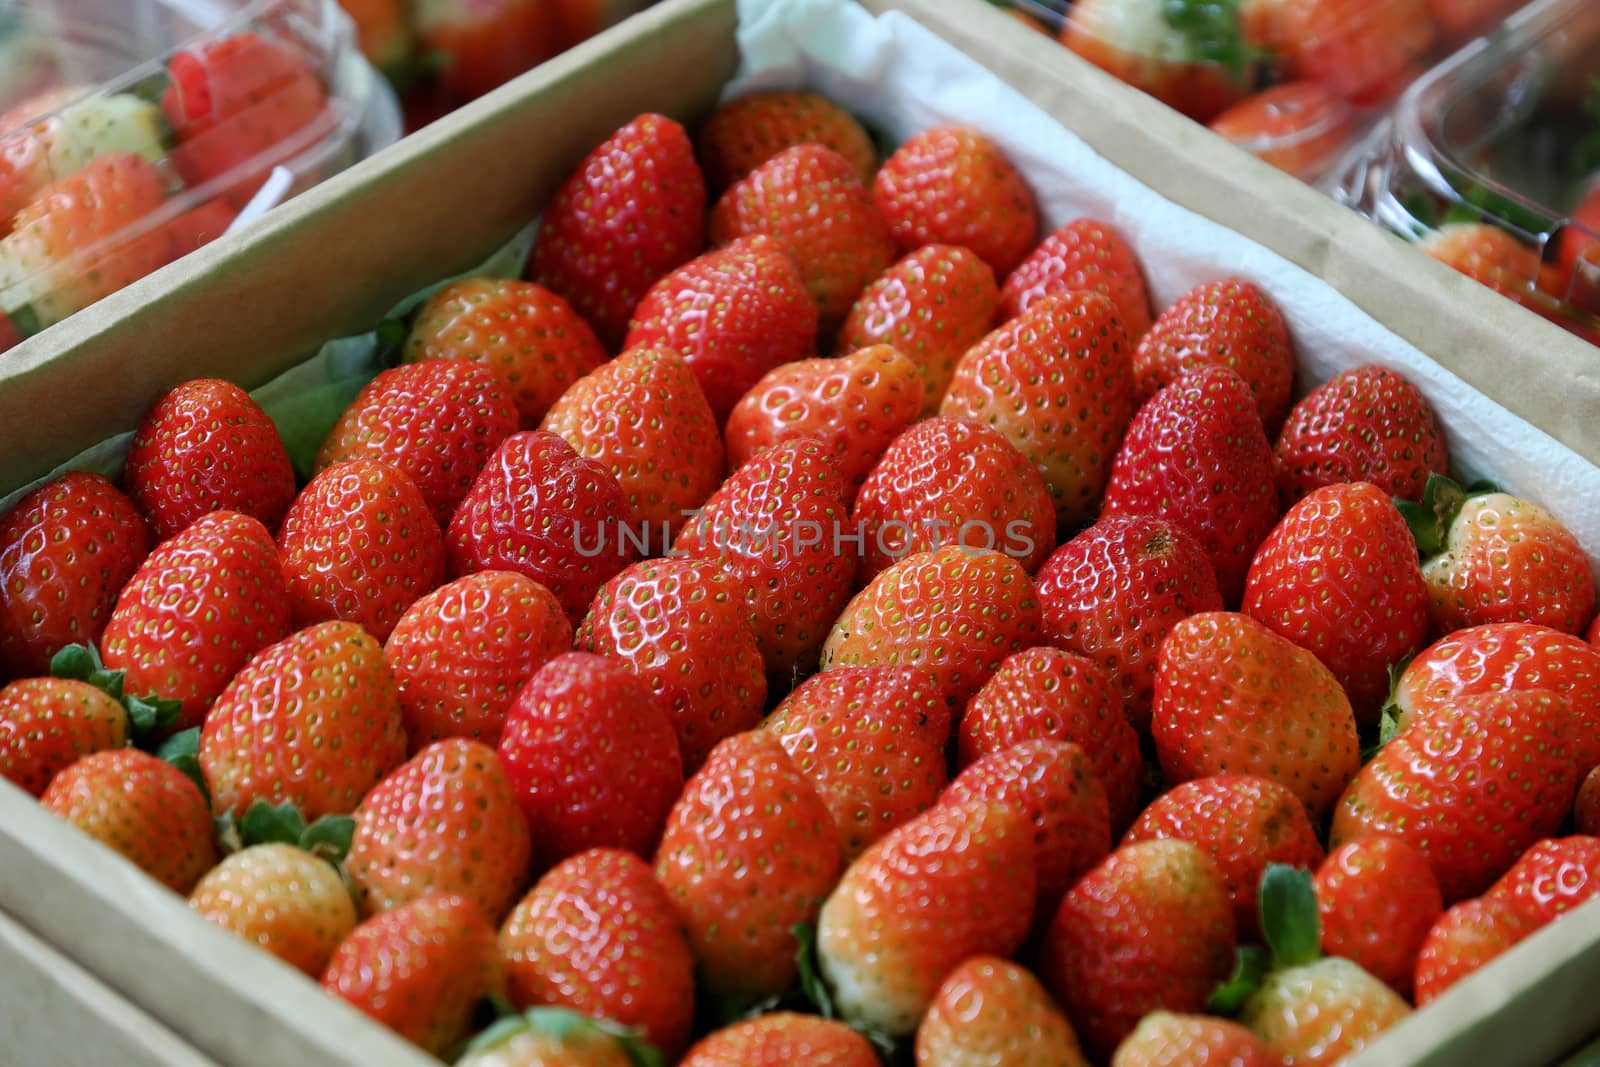 red strawberry at Vietnam marketplace by xuanhuongho